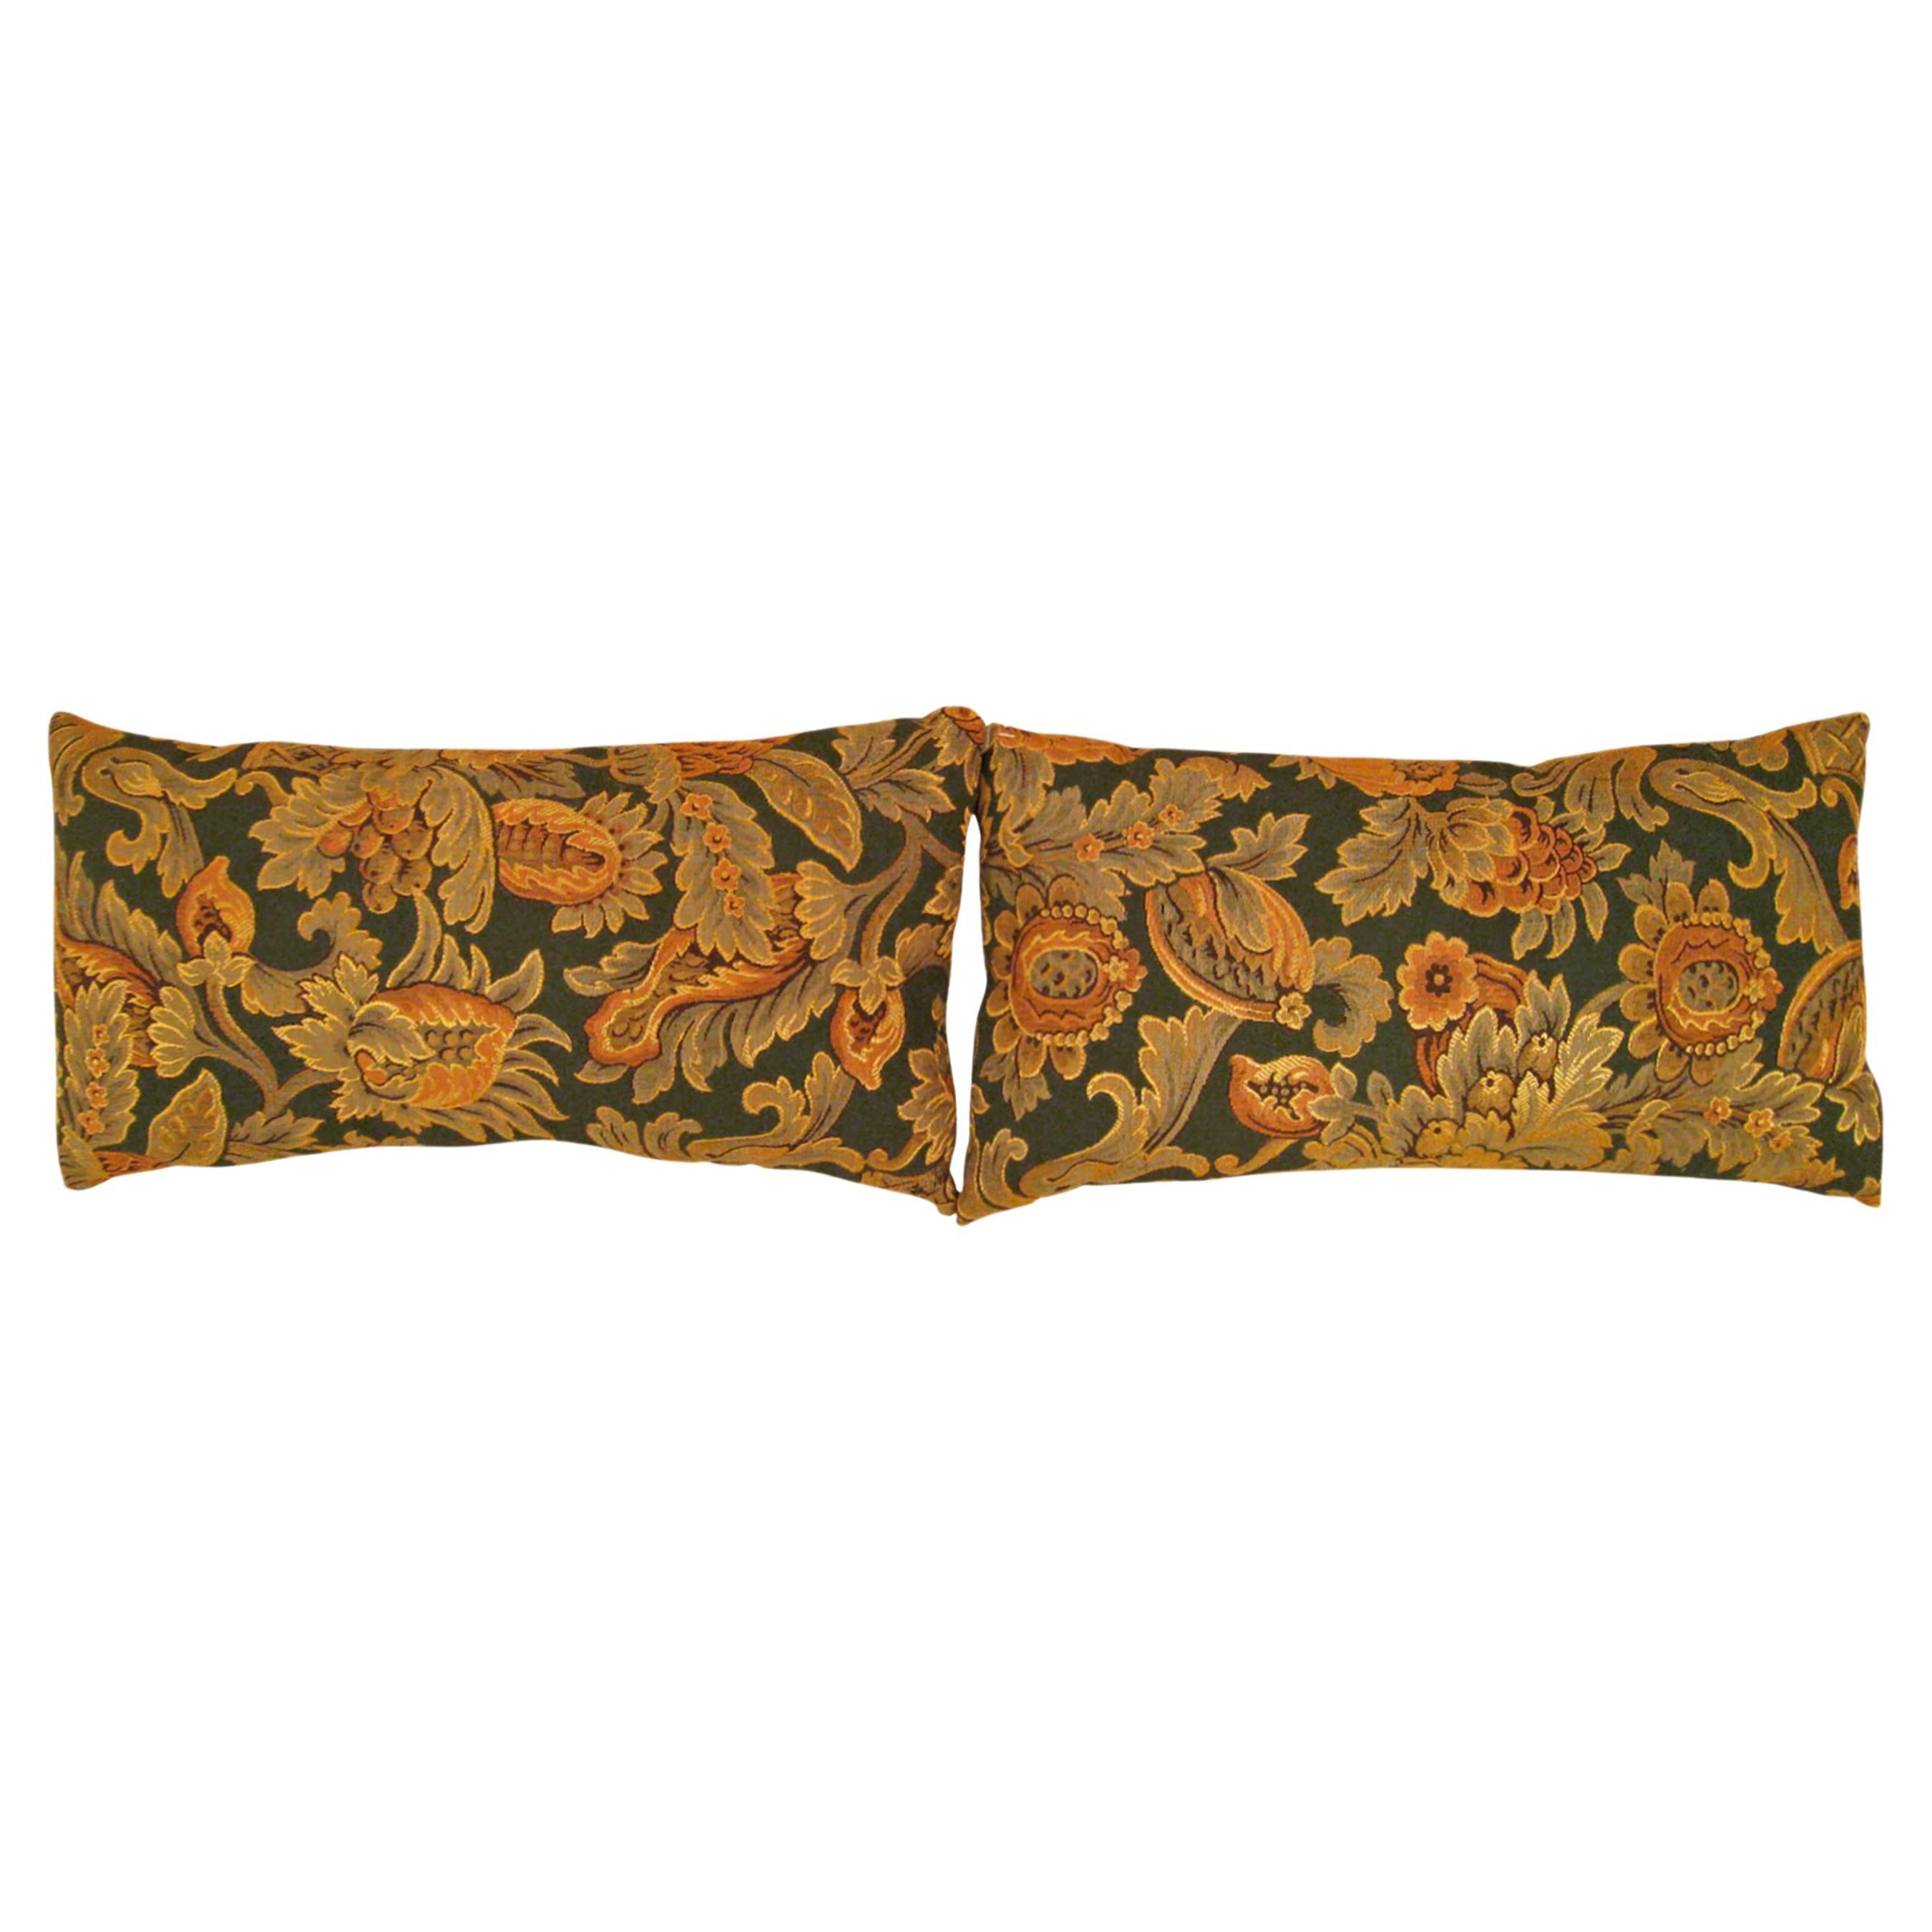 Pair of Decorative Antique Jacquard Tapestry Pillows with Floral Elements  For Sale